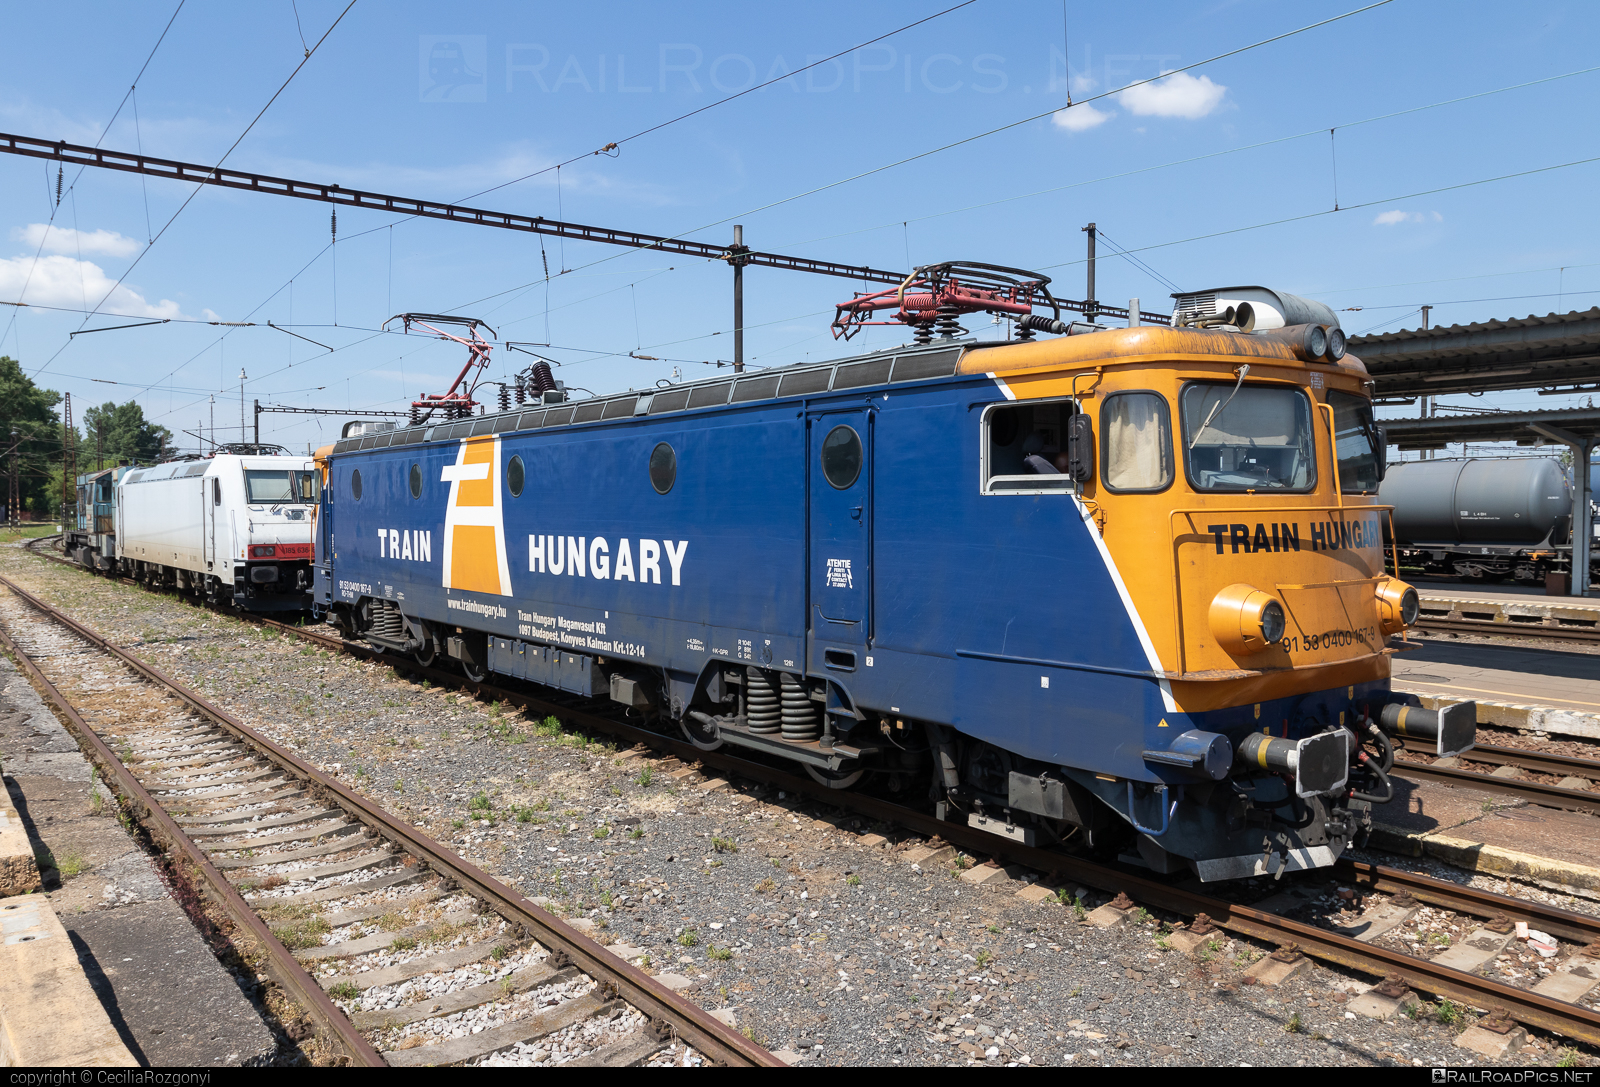 Electroputere LE 5100 - 0400 167-9 operated by Train Hungary Magánvasút Kft #TrainHungaryMaganvasut #TrainHungaryMaganvasutKft #electroputere #electroputerecraiova #electroputerele5100 #le5100 #trainhungary